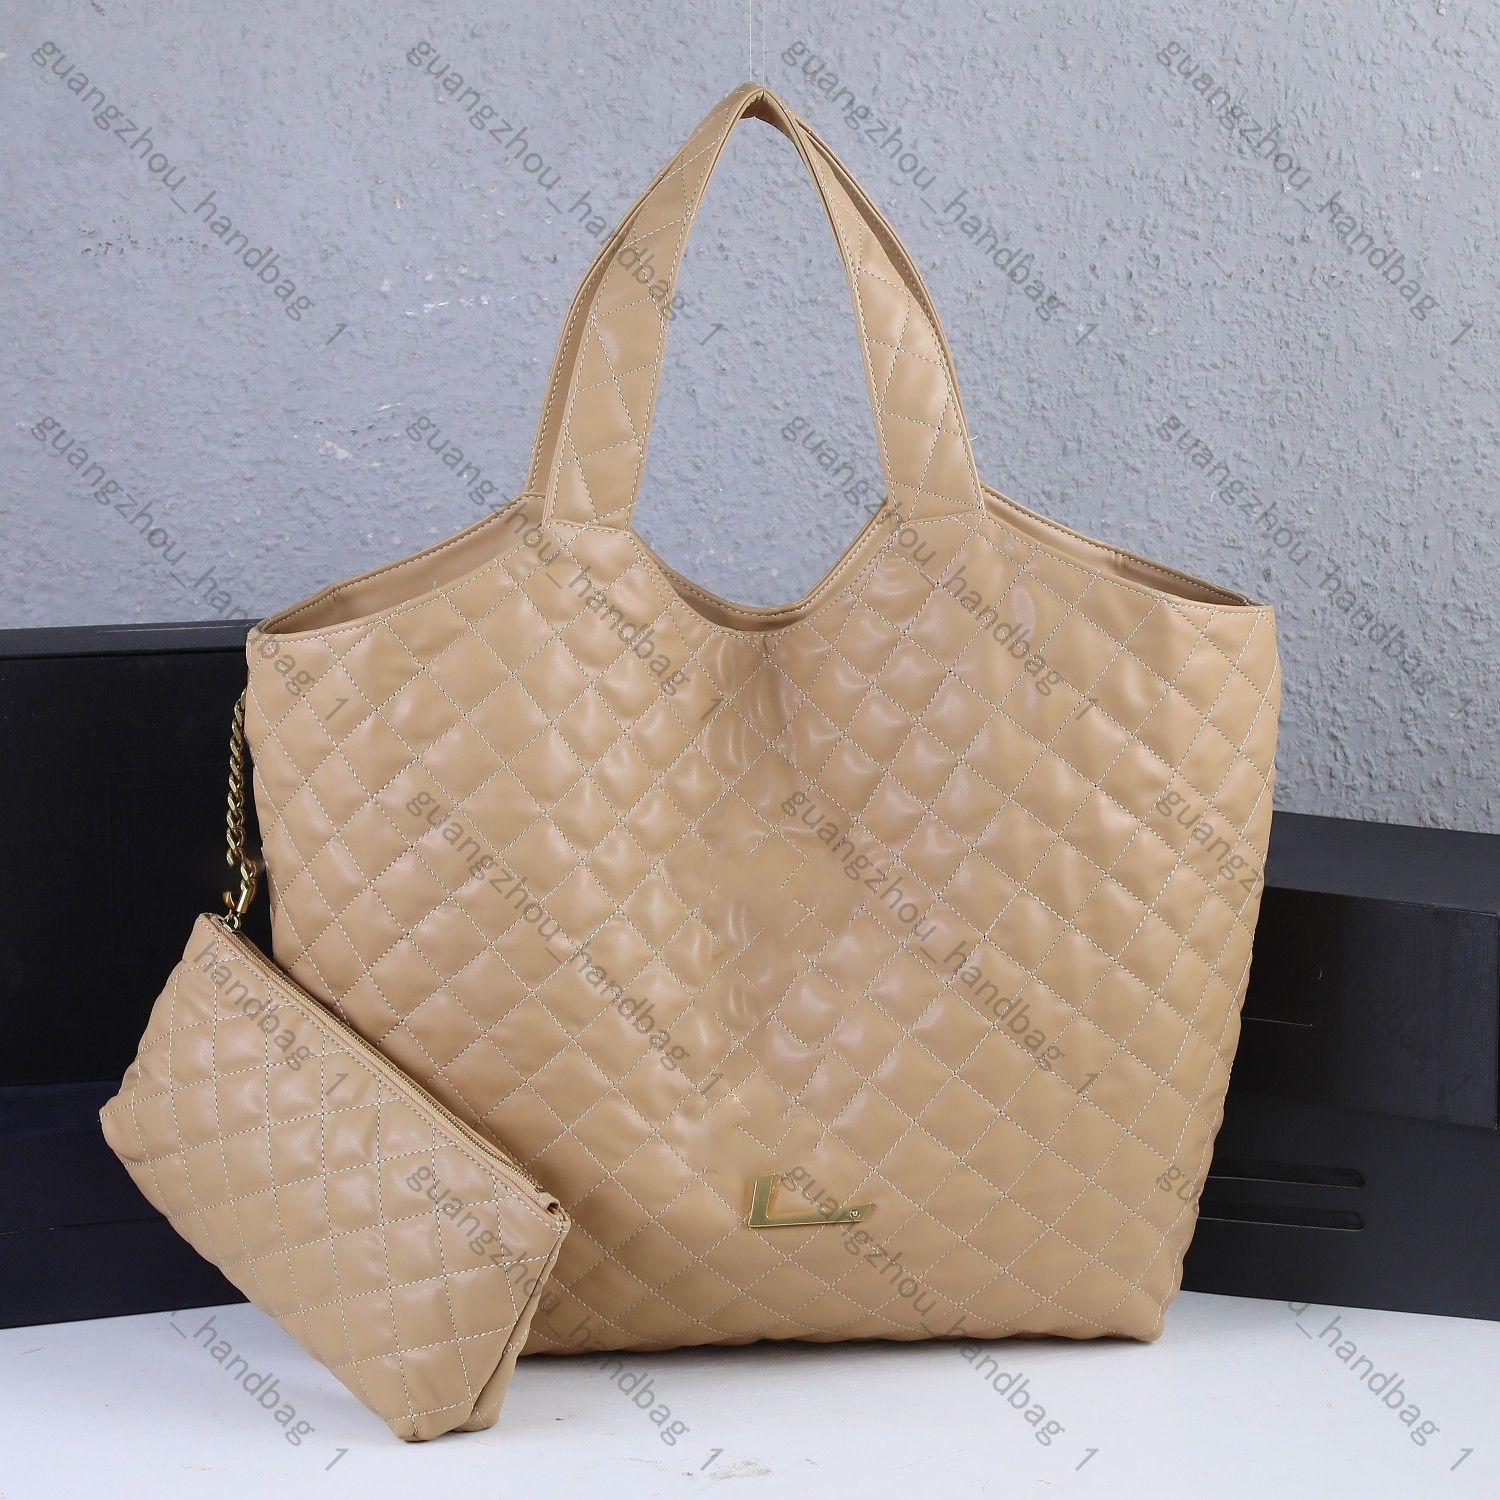 ICARE maxi shopping bag in quilted nubuck suede